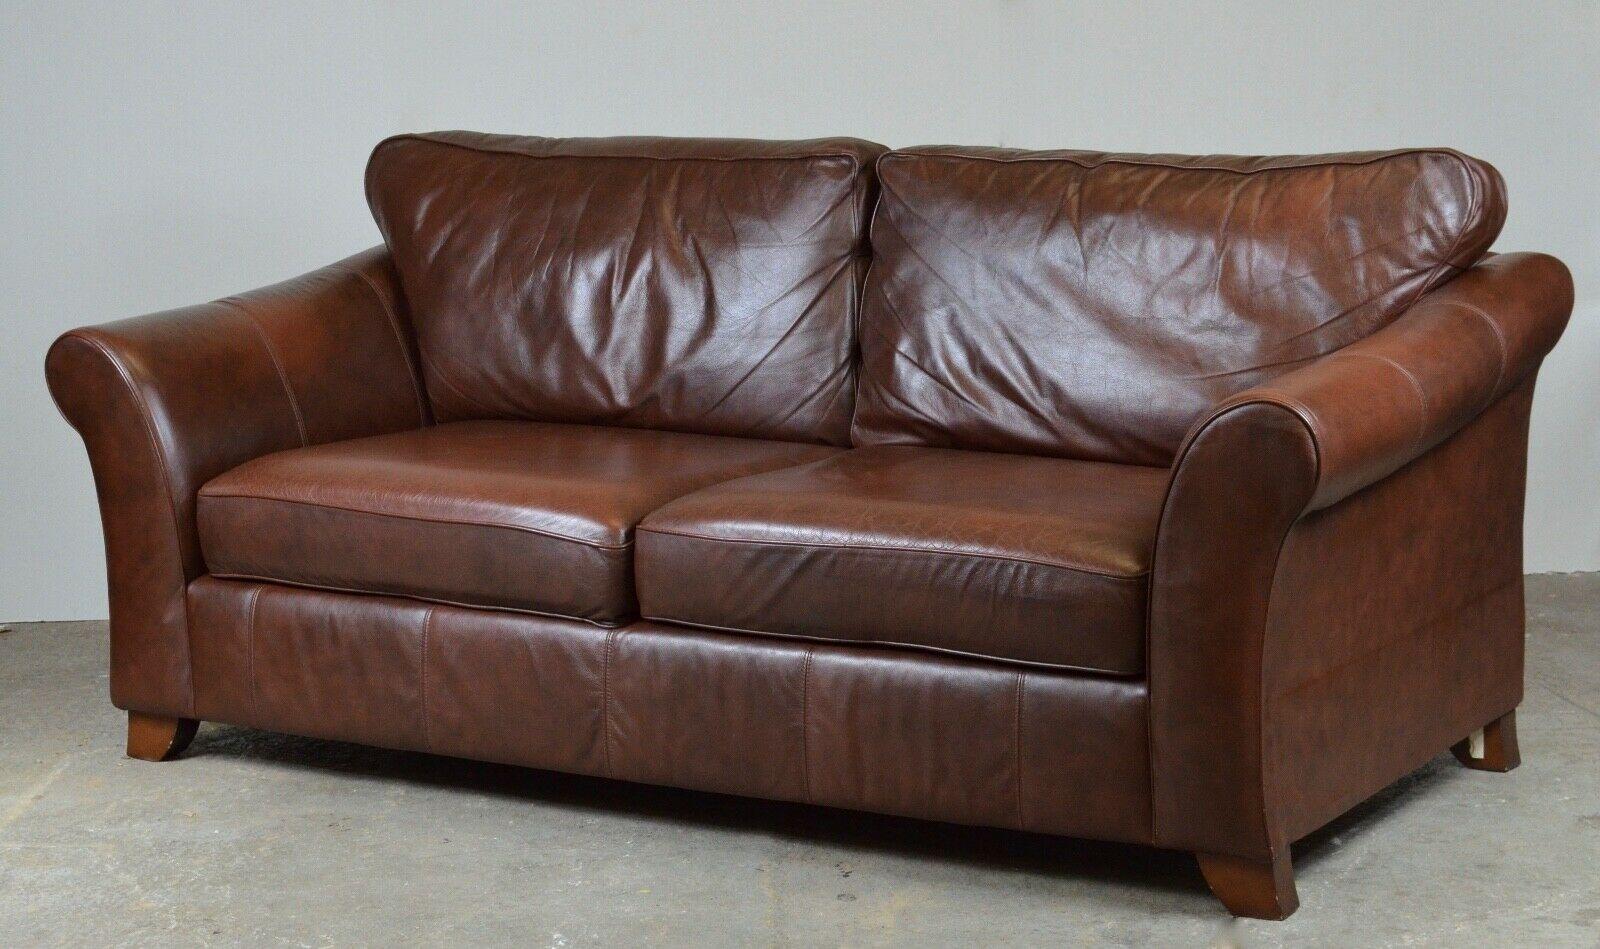 Art Deco British Marks & Spencer Abbey 3 Seater Brown Leather Sofa / Armchair Available